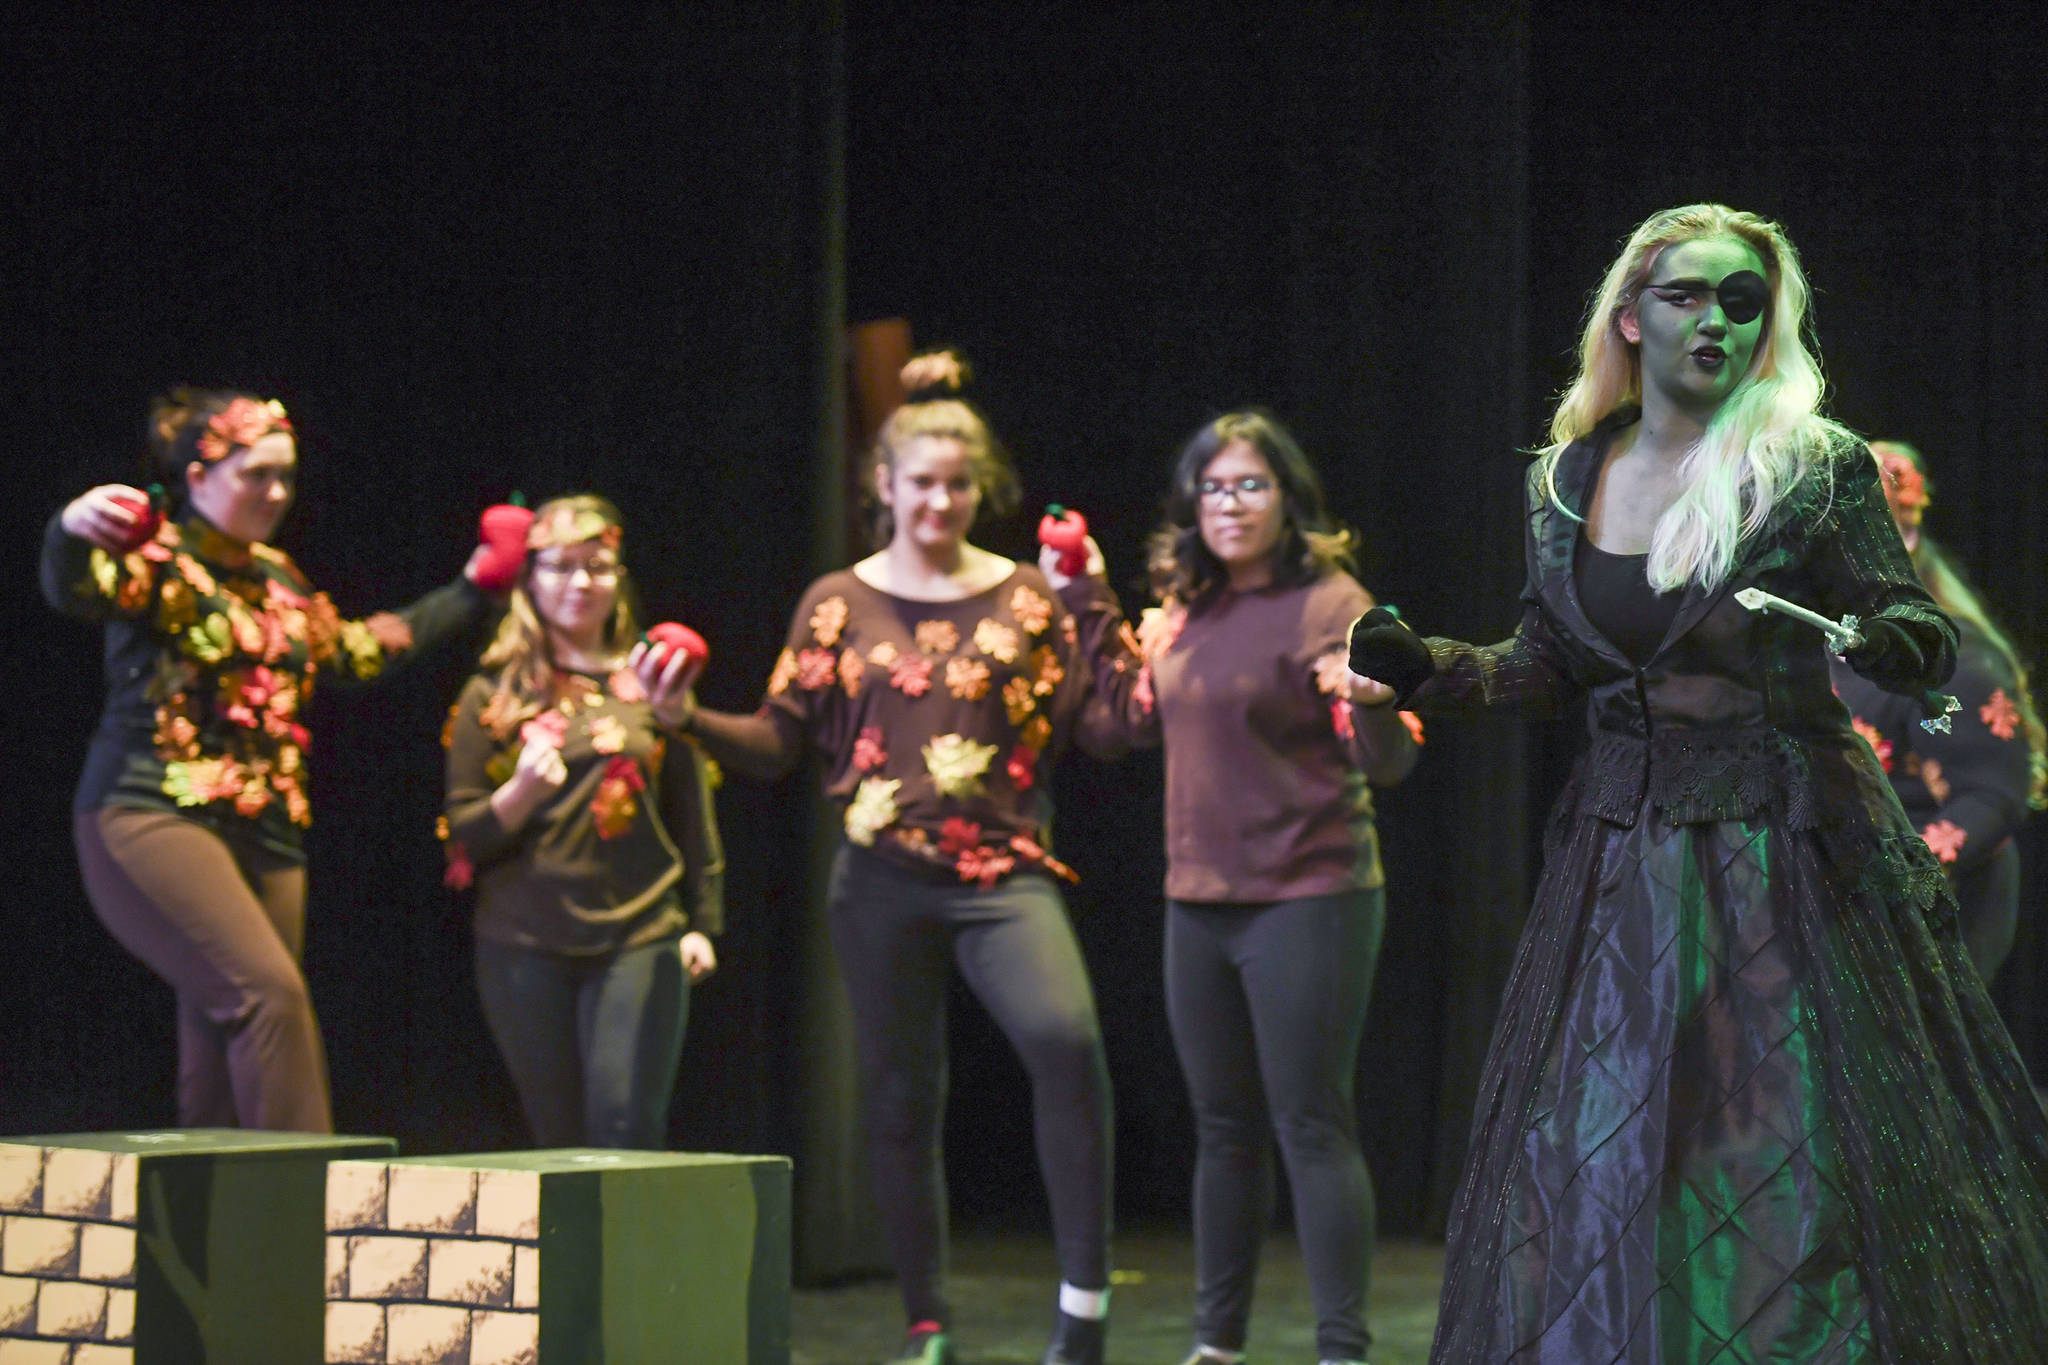 Mumbi the Wicked Witch, played by Olivia Bolin, has an encounter with the Enchanted Forest during rehearsal for the Thunder Mountain High School production of “Choose Your Own Oz” at TMHS on Friday, Nov. 8, 2019. (Michael Penn | Juneau Empire)